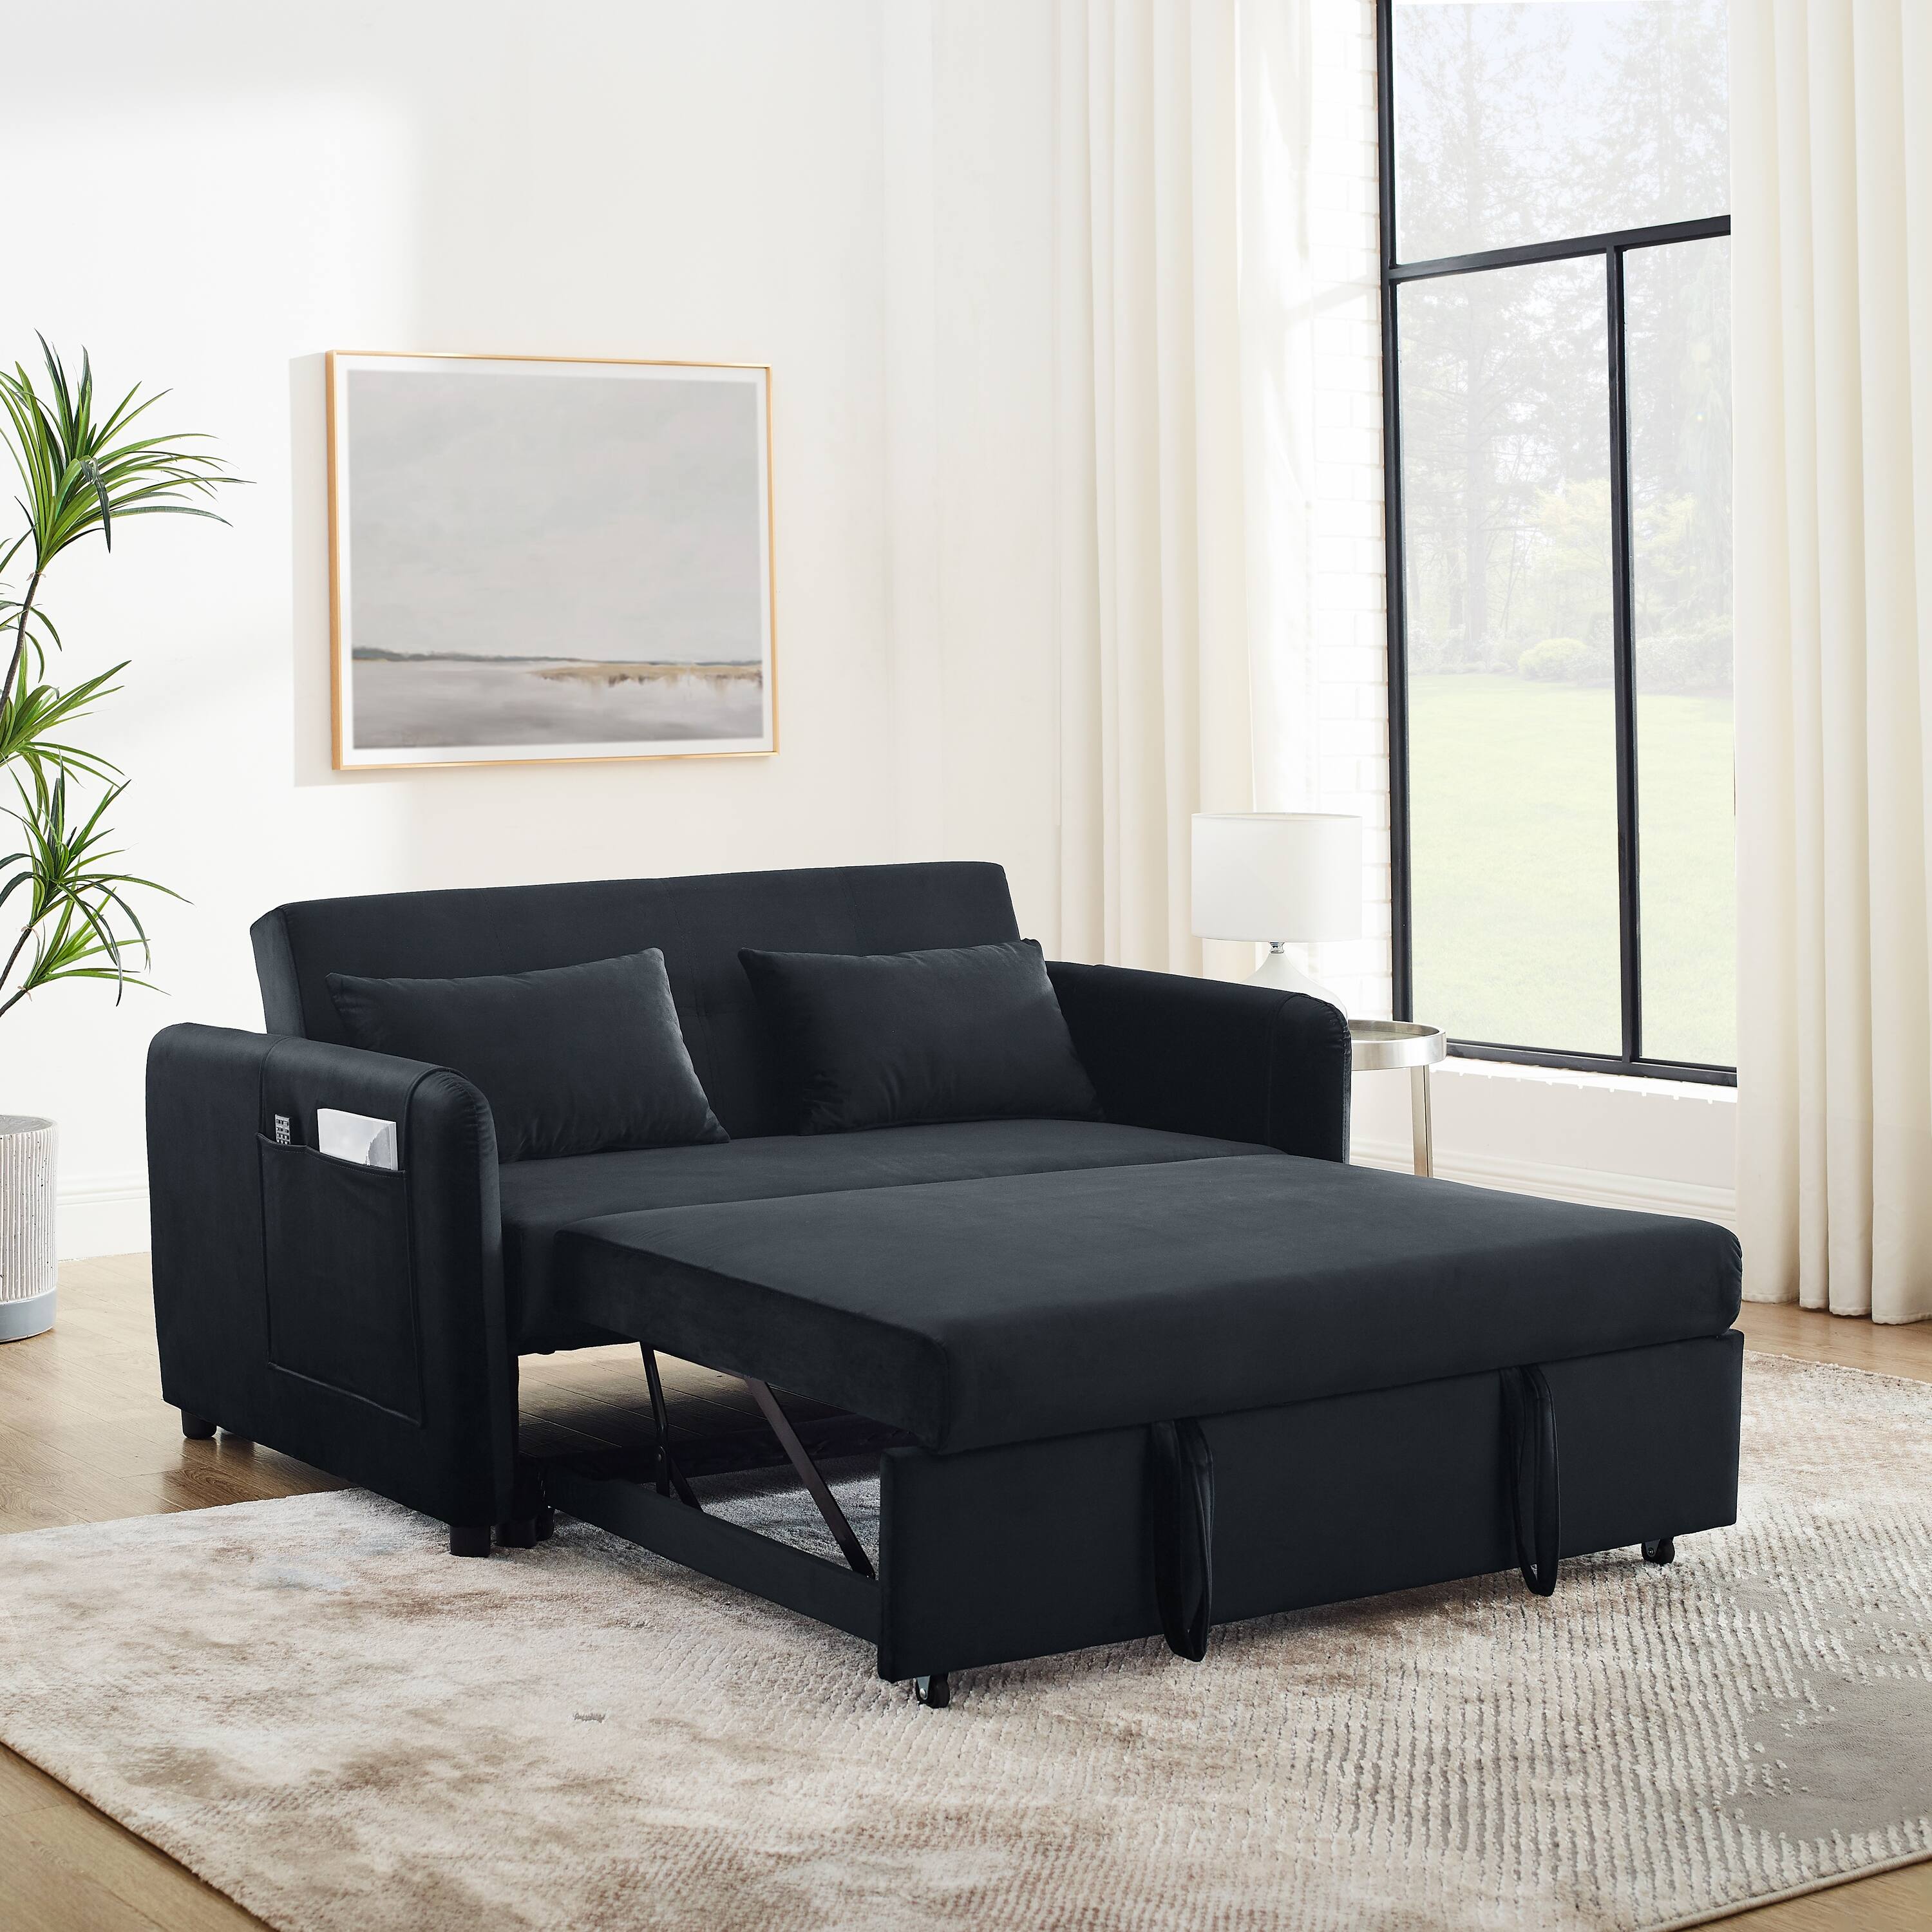 Convertible Sofa Bed, 3-in-1 Multi-Functional Velvet Sleeper Couch Pull-Out Bed, Loveseat Bed w/Adjustable Backrest & Pillows